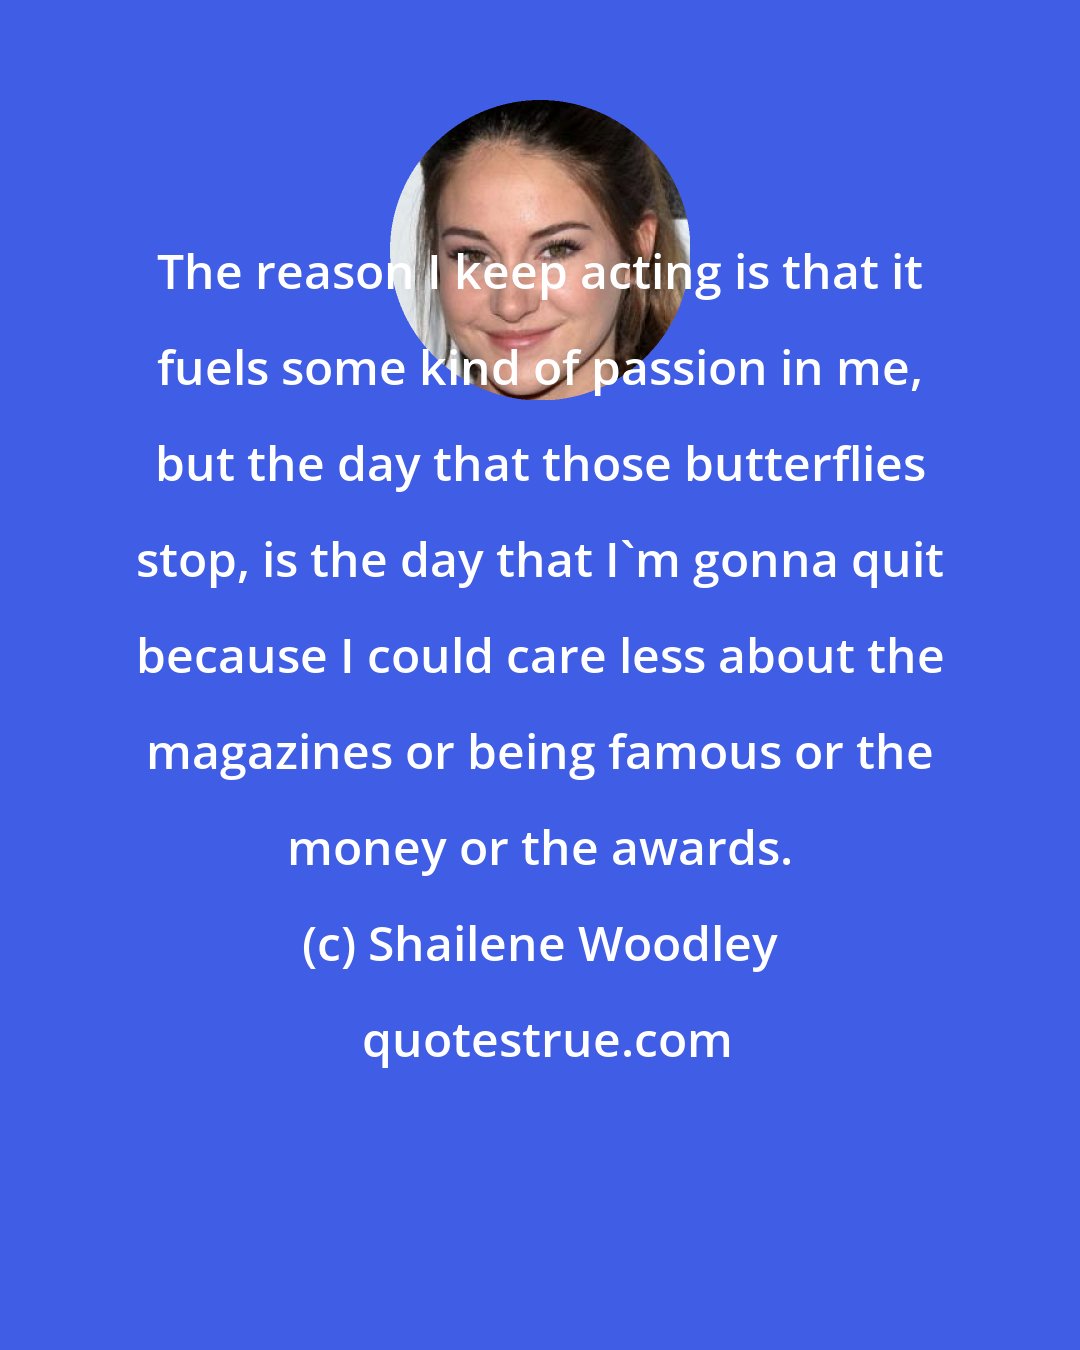 Shailene Woodley: The reason I keep acting is that it fuels some kind of passion in me, but the day that those butterflies stop, is the day that I'm gonna quit because I could care less about the magazines or being famous or the money or the awards.